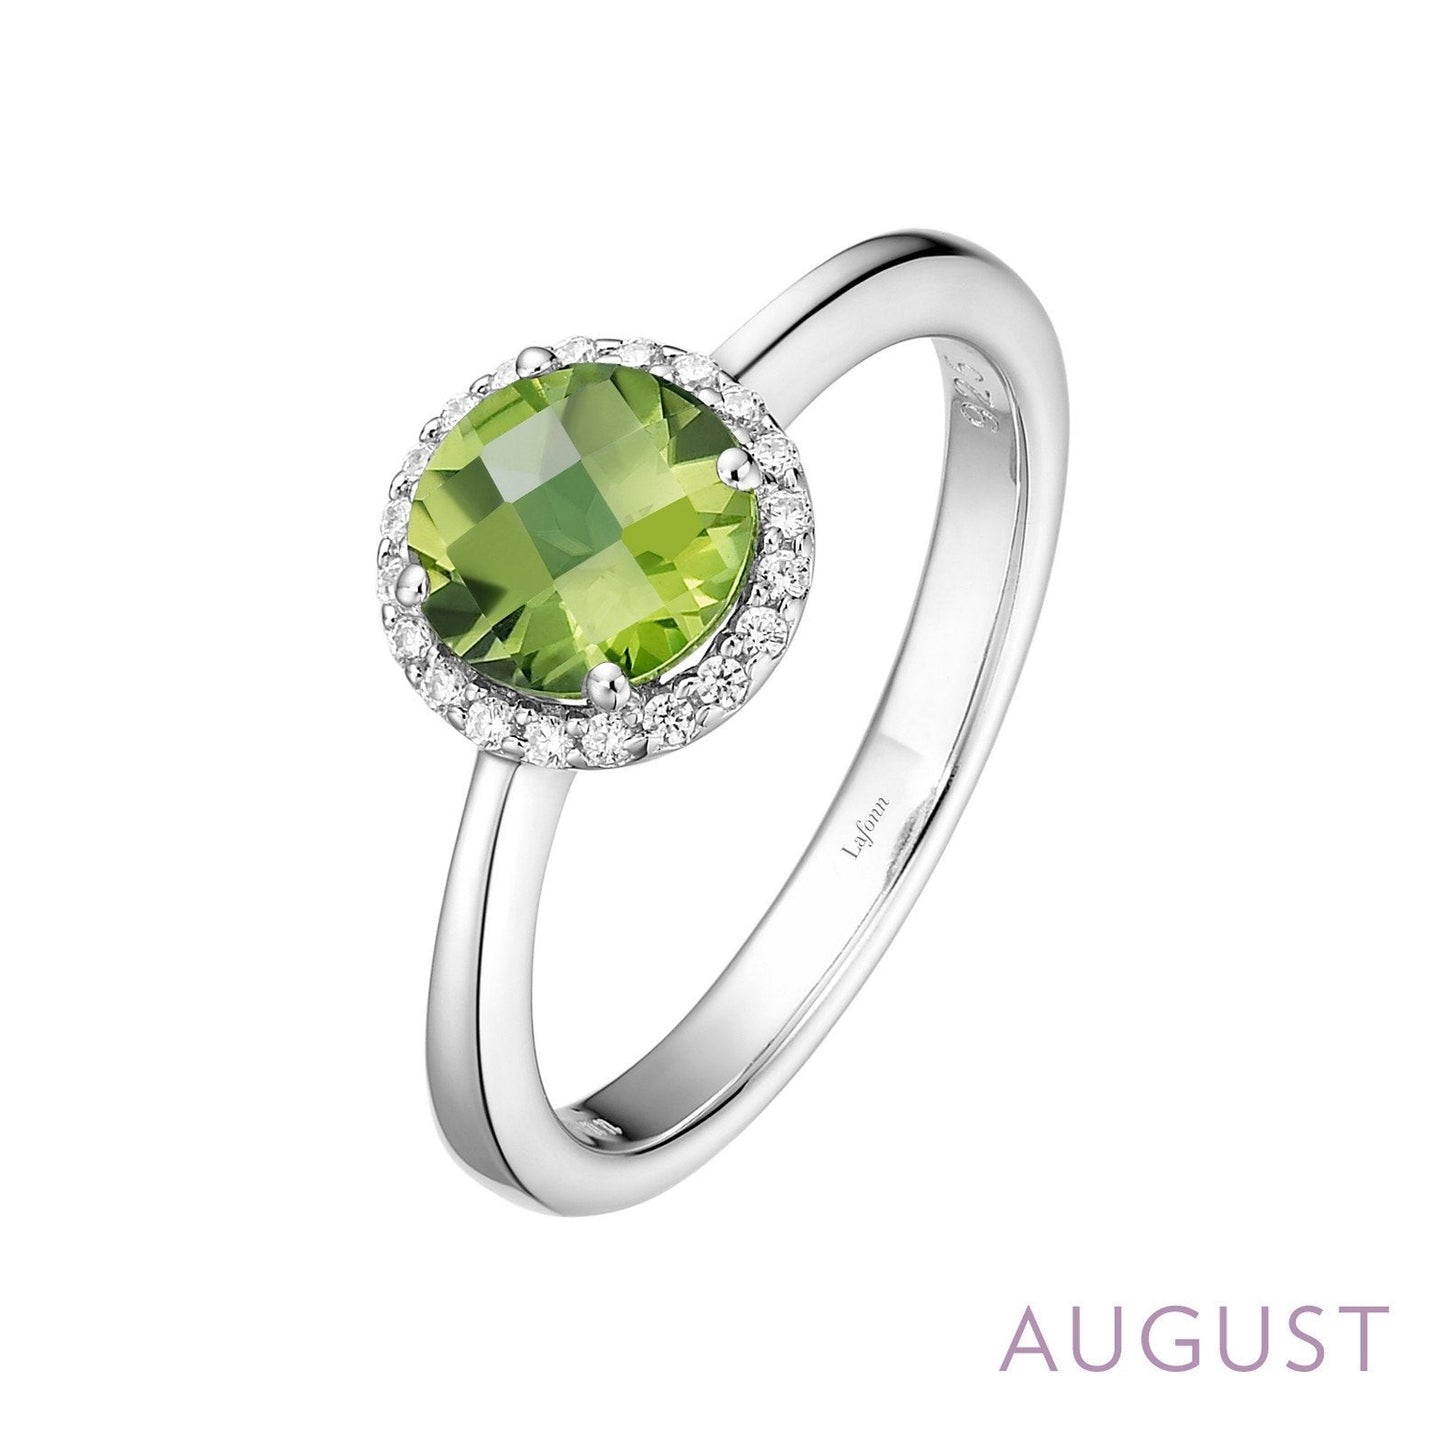 Lafonn August Birthstone Ring AUGUST RINGS Size 8 Platinum Appx CTW: 1.05 cts. Peridot Appx 0.85 cts.  Lassaire simulated diamonds: 0.20 cts. CTS 